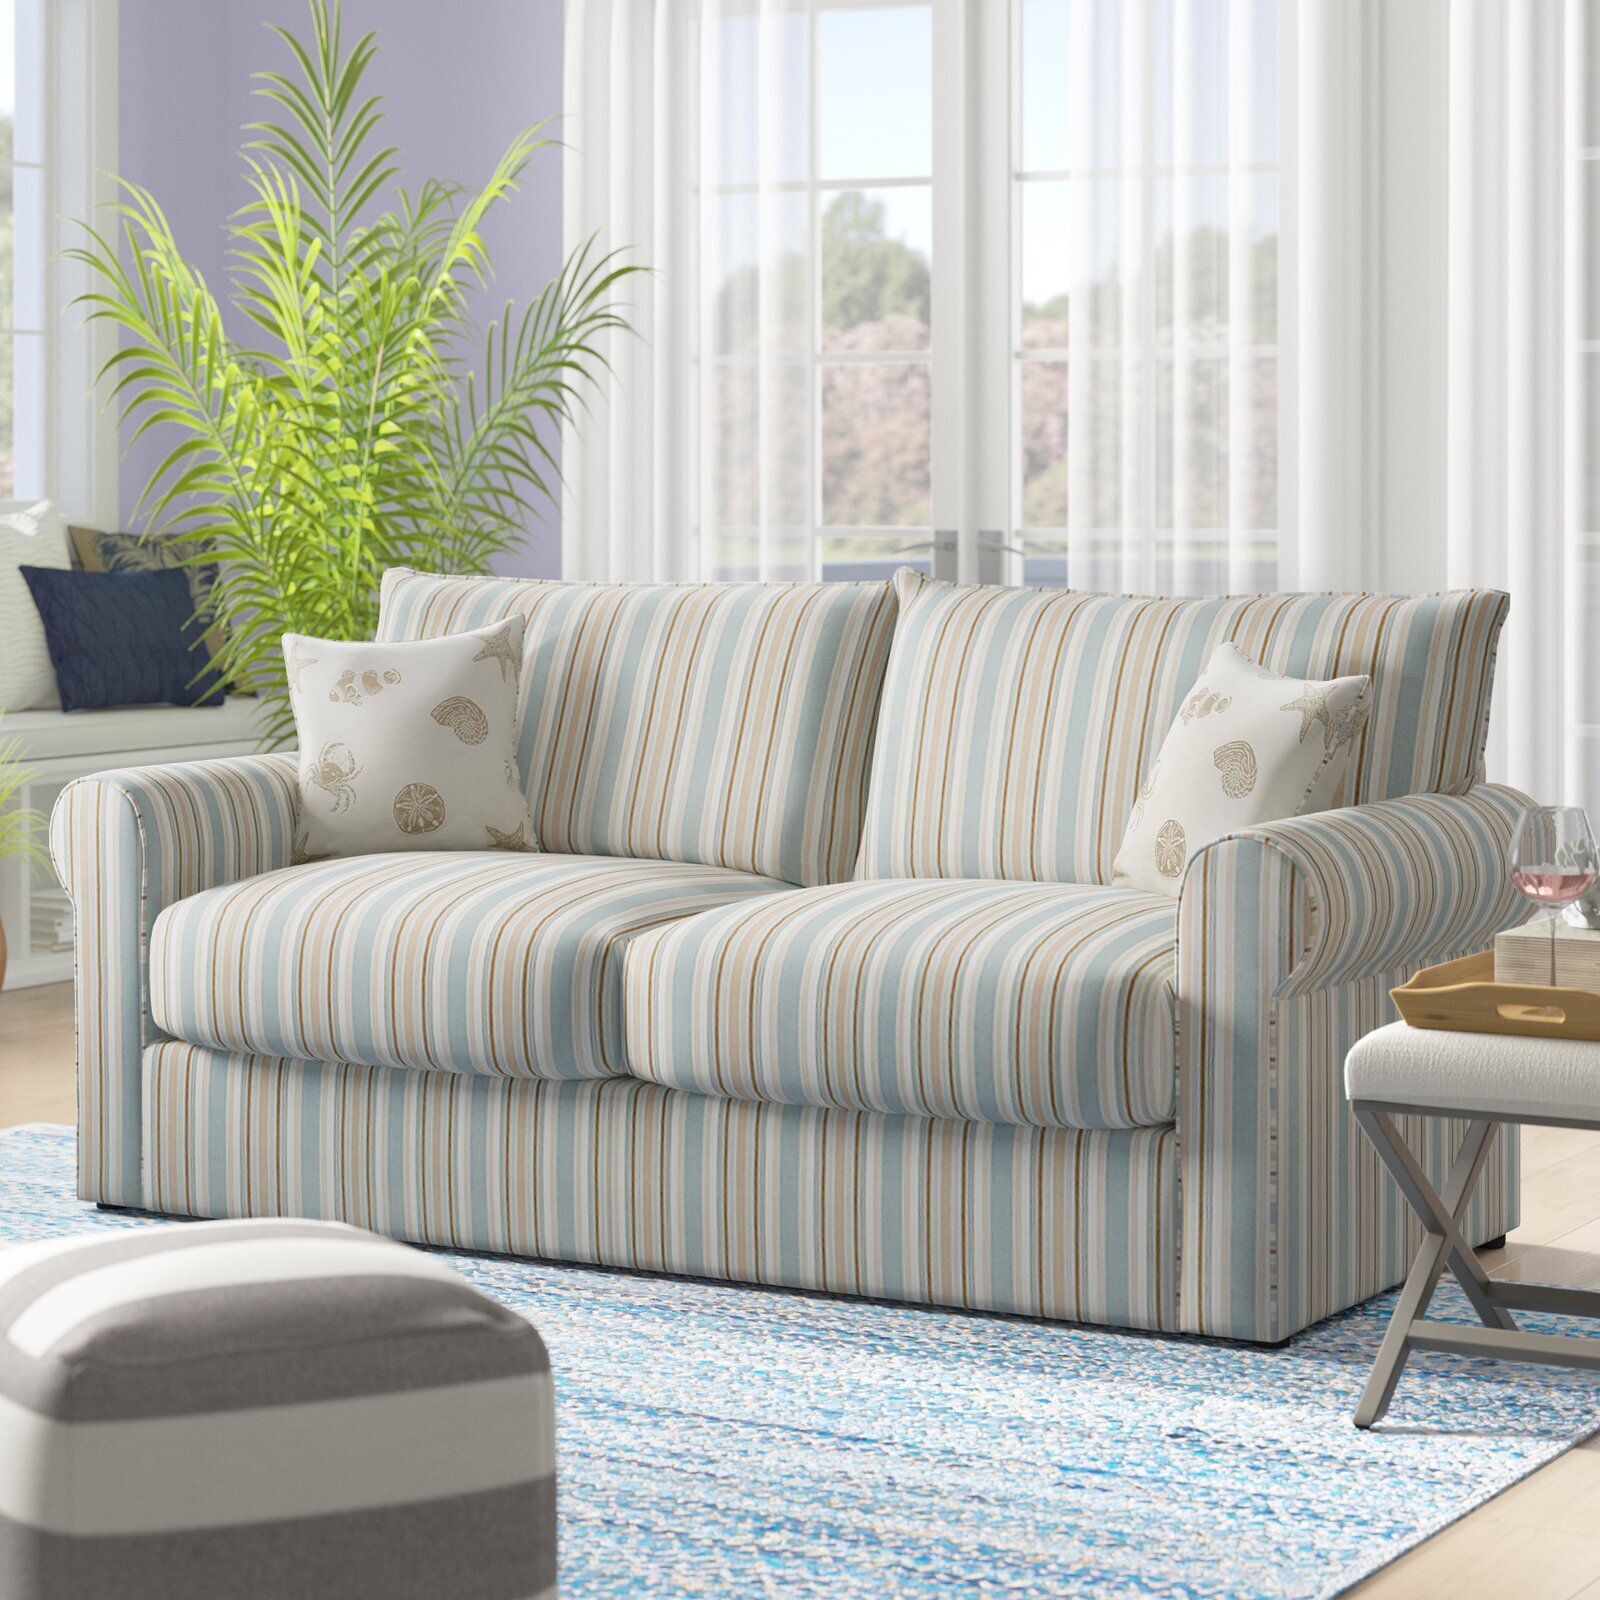 Striped couches with two or more different colors